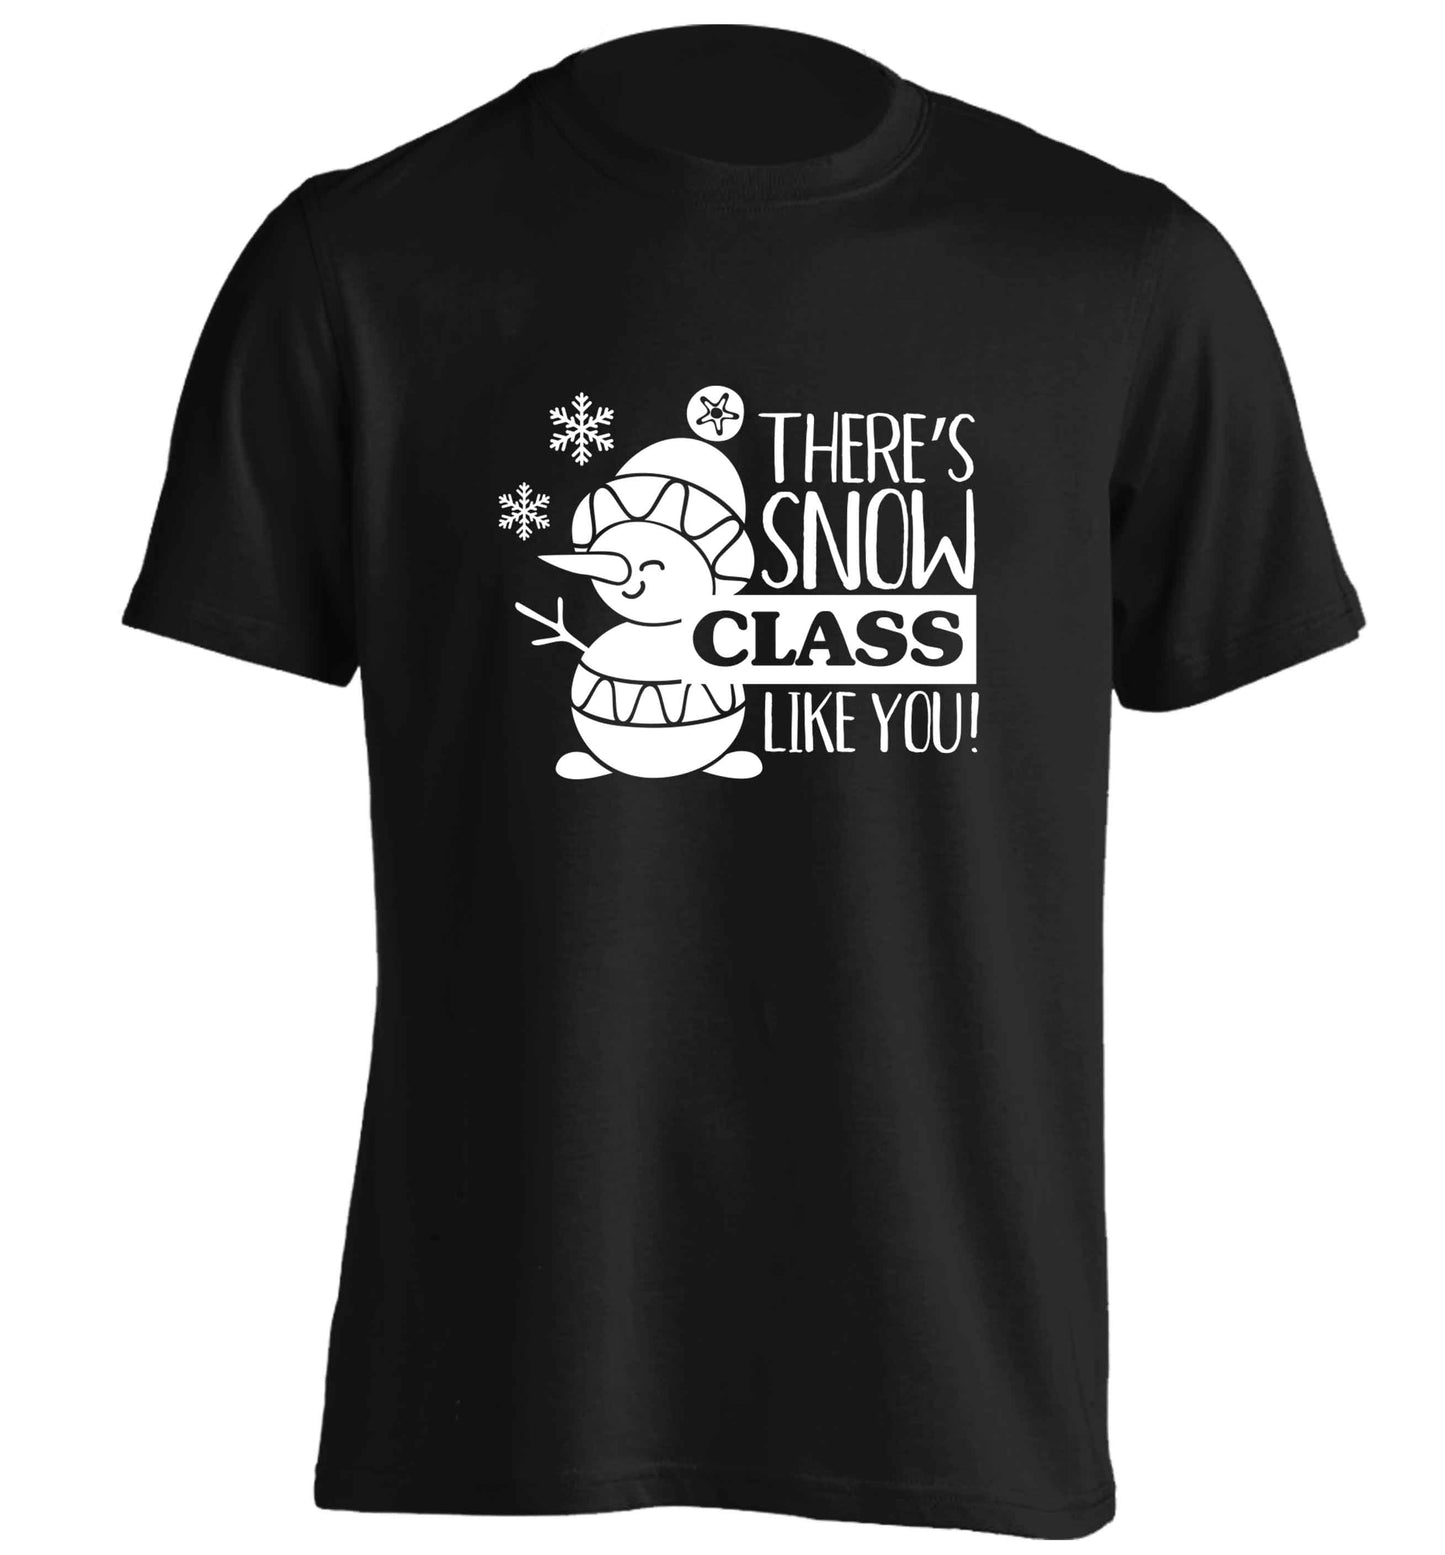 There's snow class like you adults unisex black Tshirt 2XL